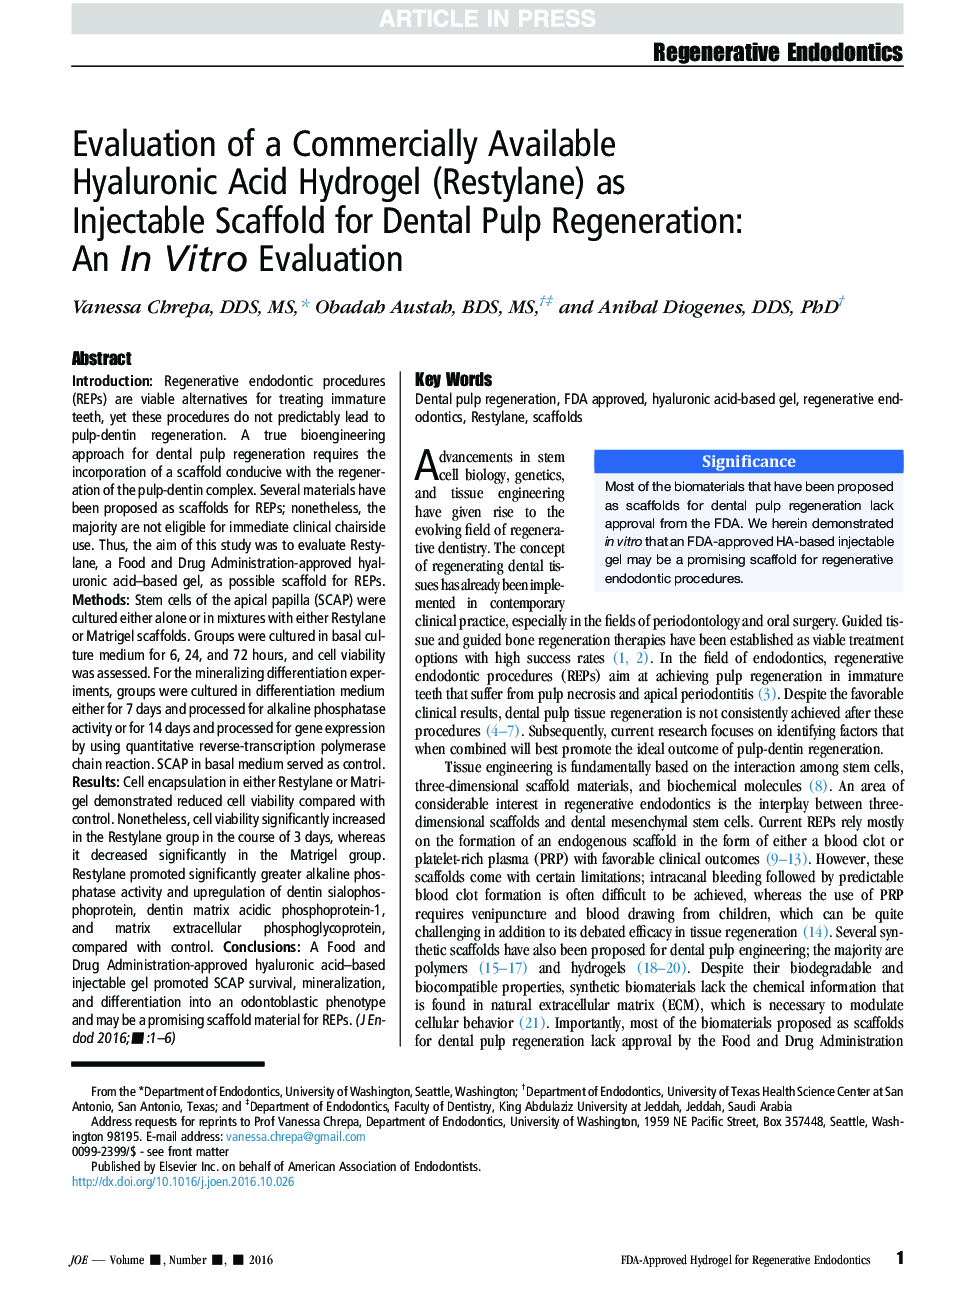 Evaluation of a Commercially Available Hyaluronic Acid Hydrogel (Restylane) as Injectable Scaffold for Dental Pulp Regeneration: An InÂ Vitro Evaluation